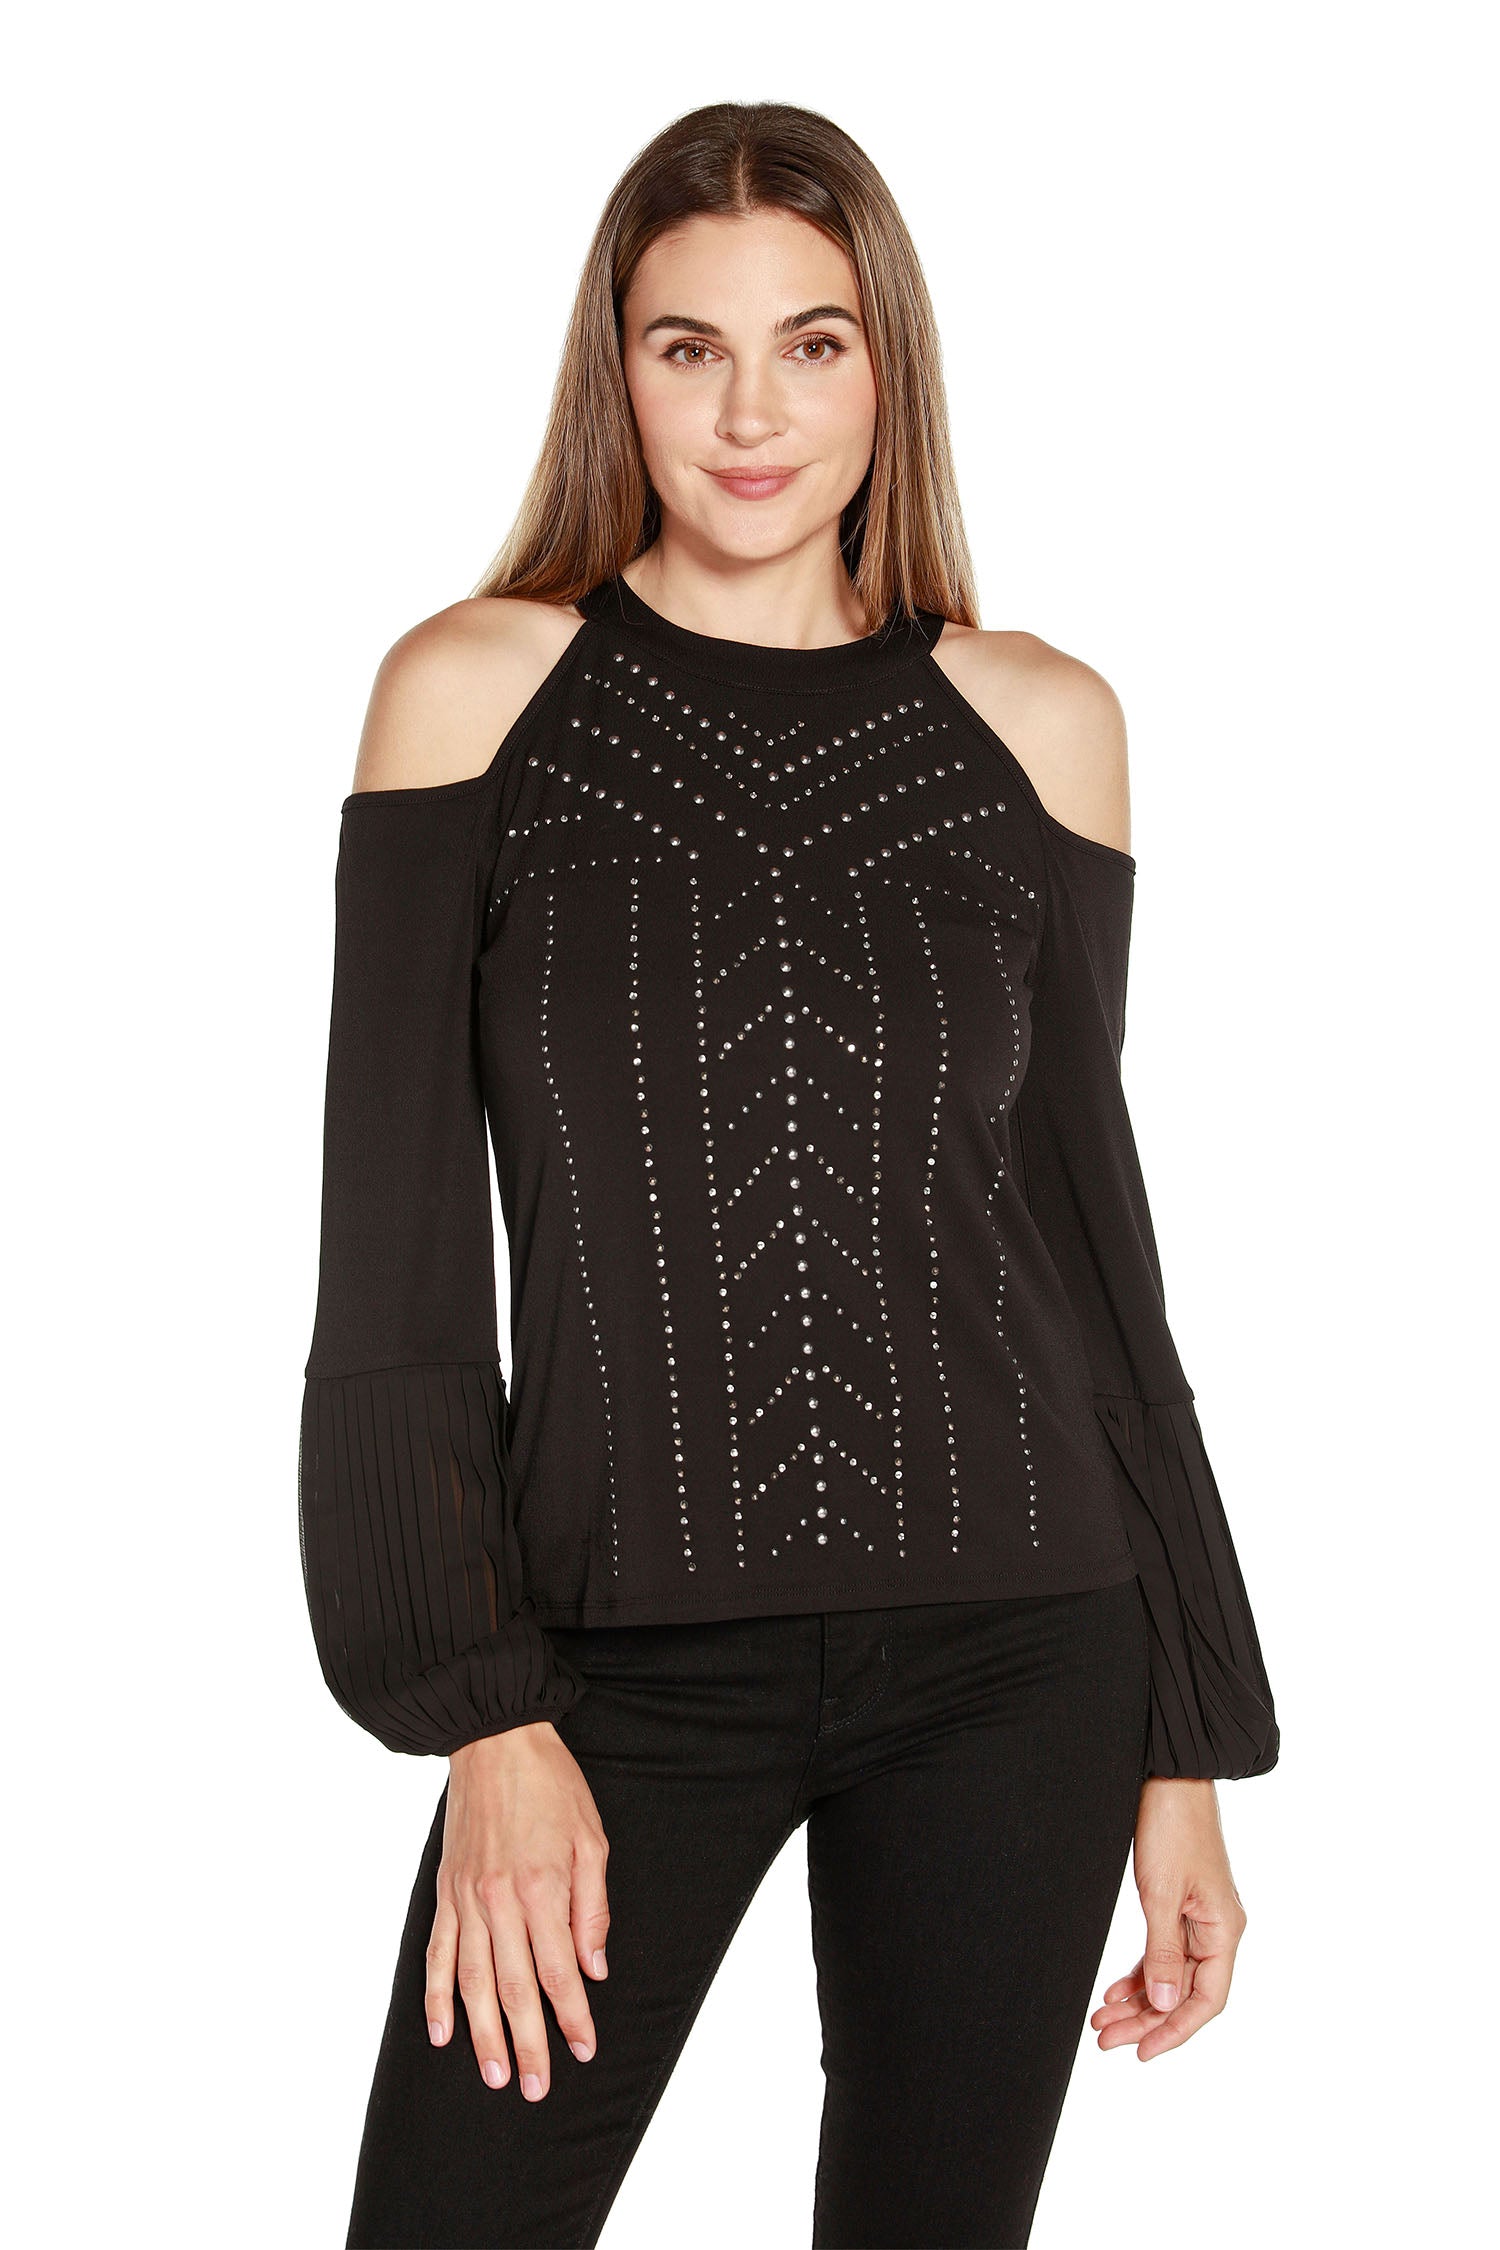 Women's Knit Cold Shoulder Top with Silver Nailhead and Rhinestone Design